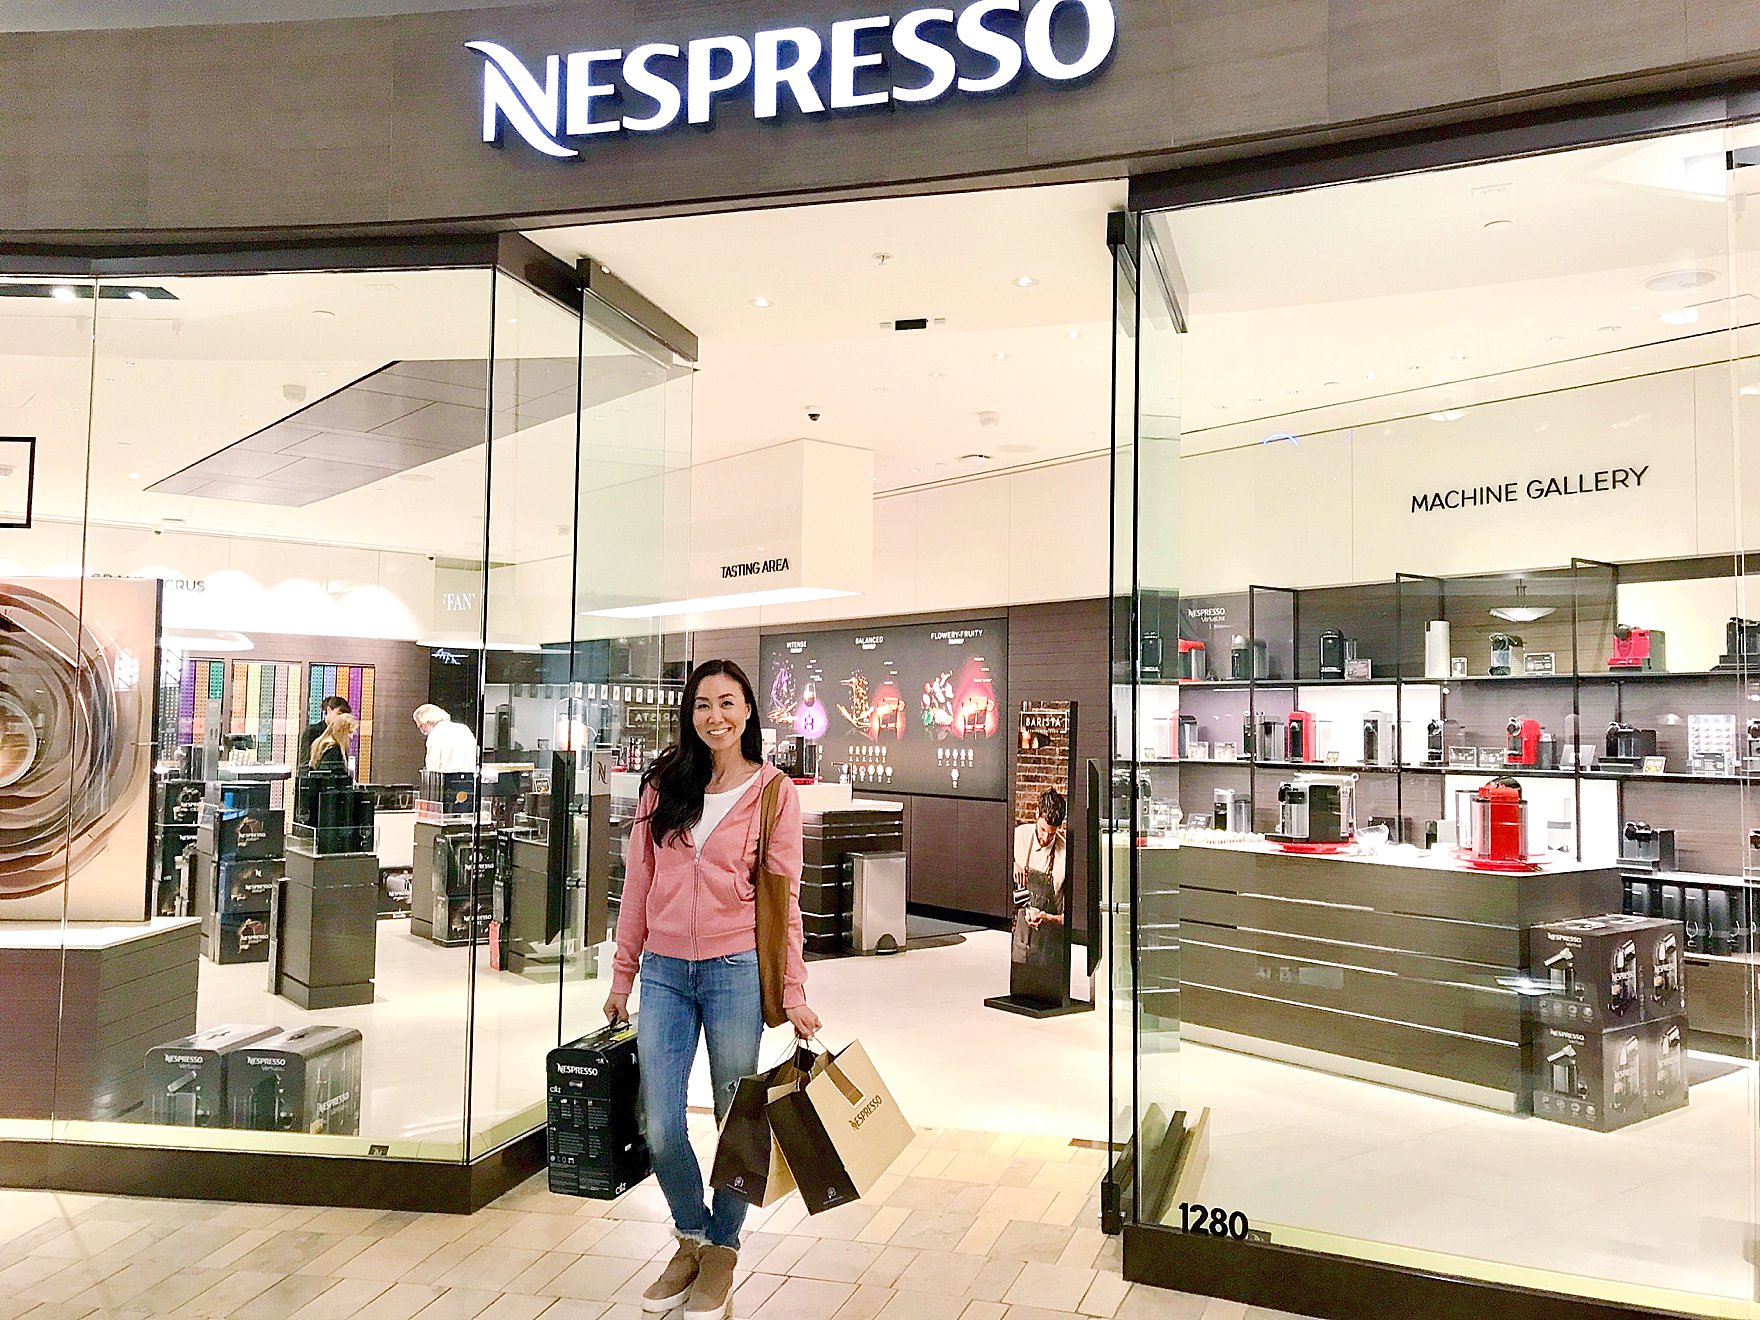 Why I gave up my old espresso machine and bought a Nespresso